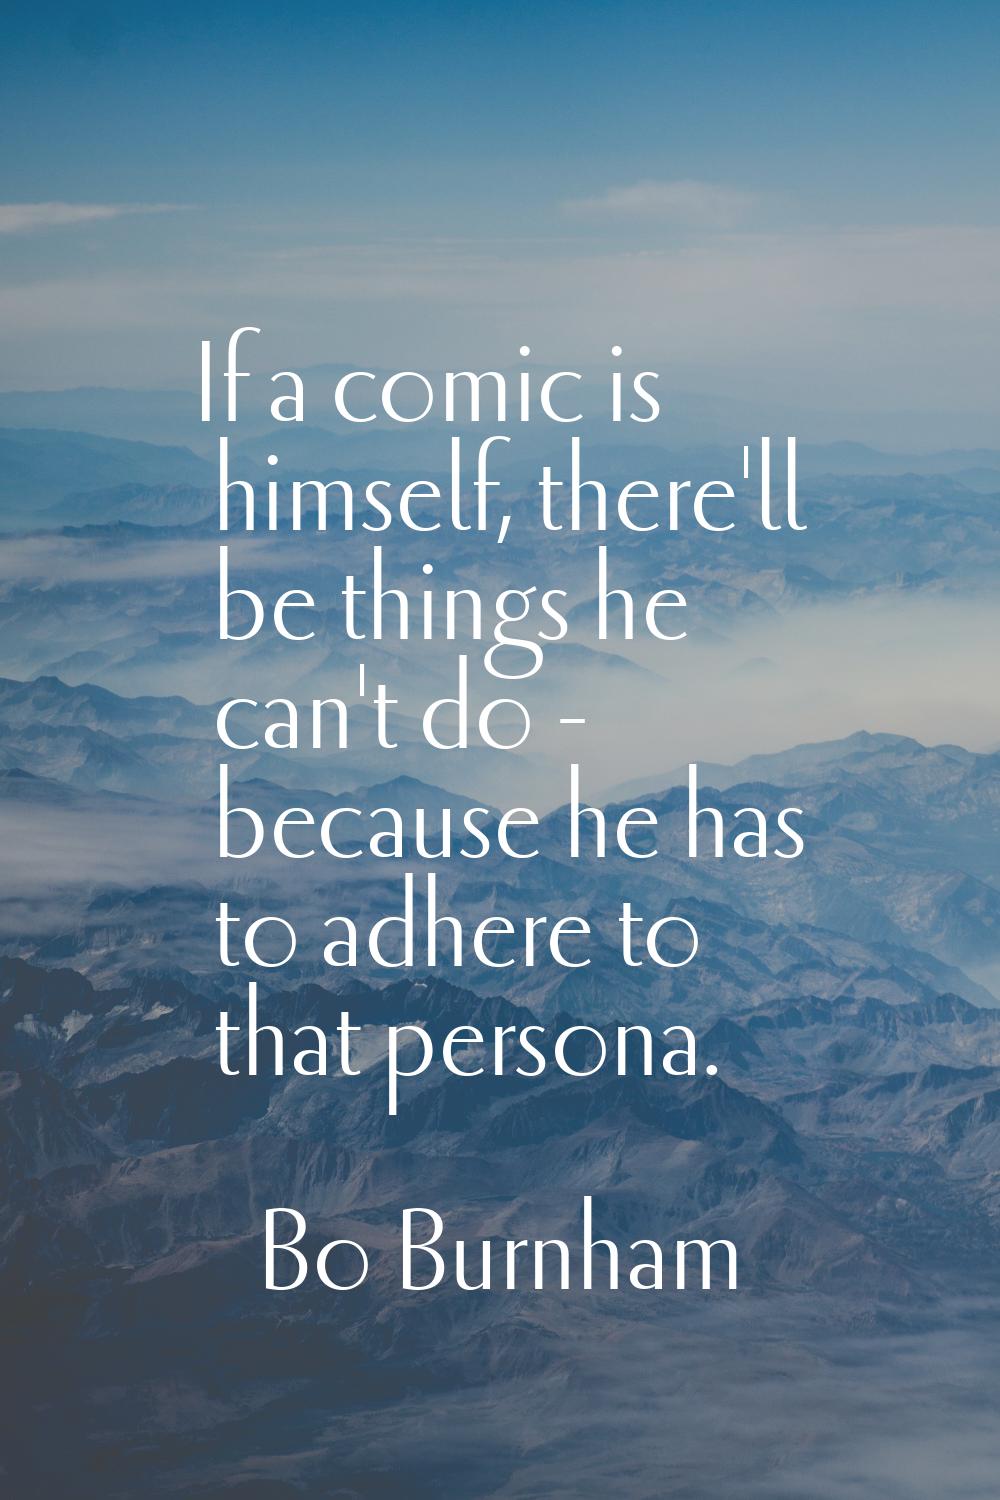 If a comic is himself, there'll be things he can't do - because he has to adhere to that persona.